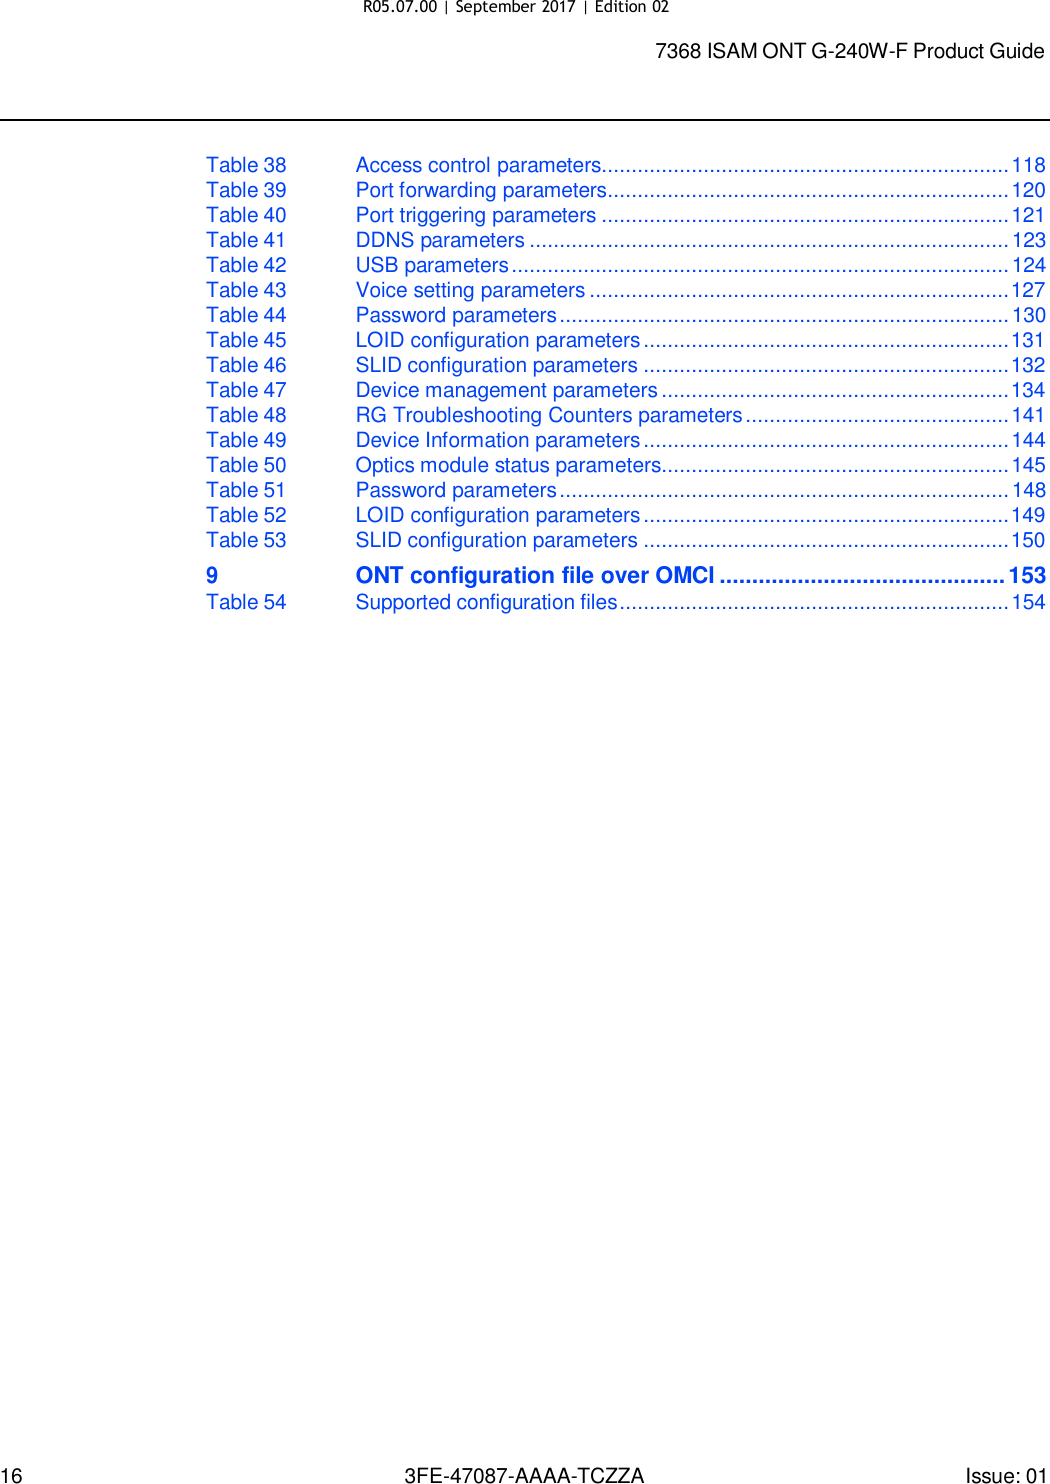 Page 14 of Nokia Bell G240WFV2 7368 ISAM GPON ONU User Manual 7368 ISAM ONT G 240W F Product Guide